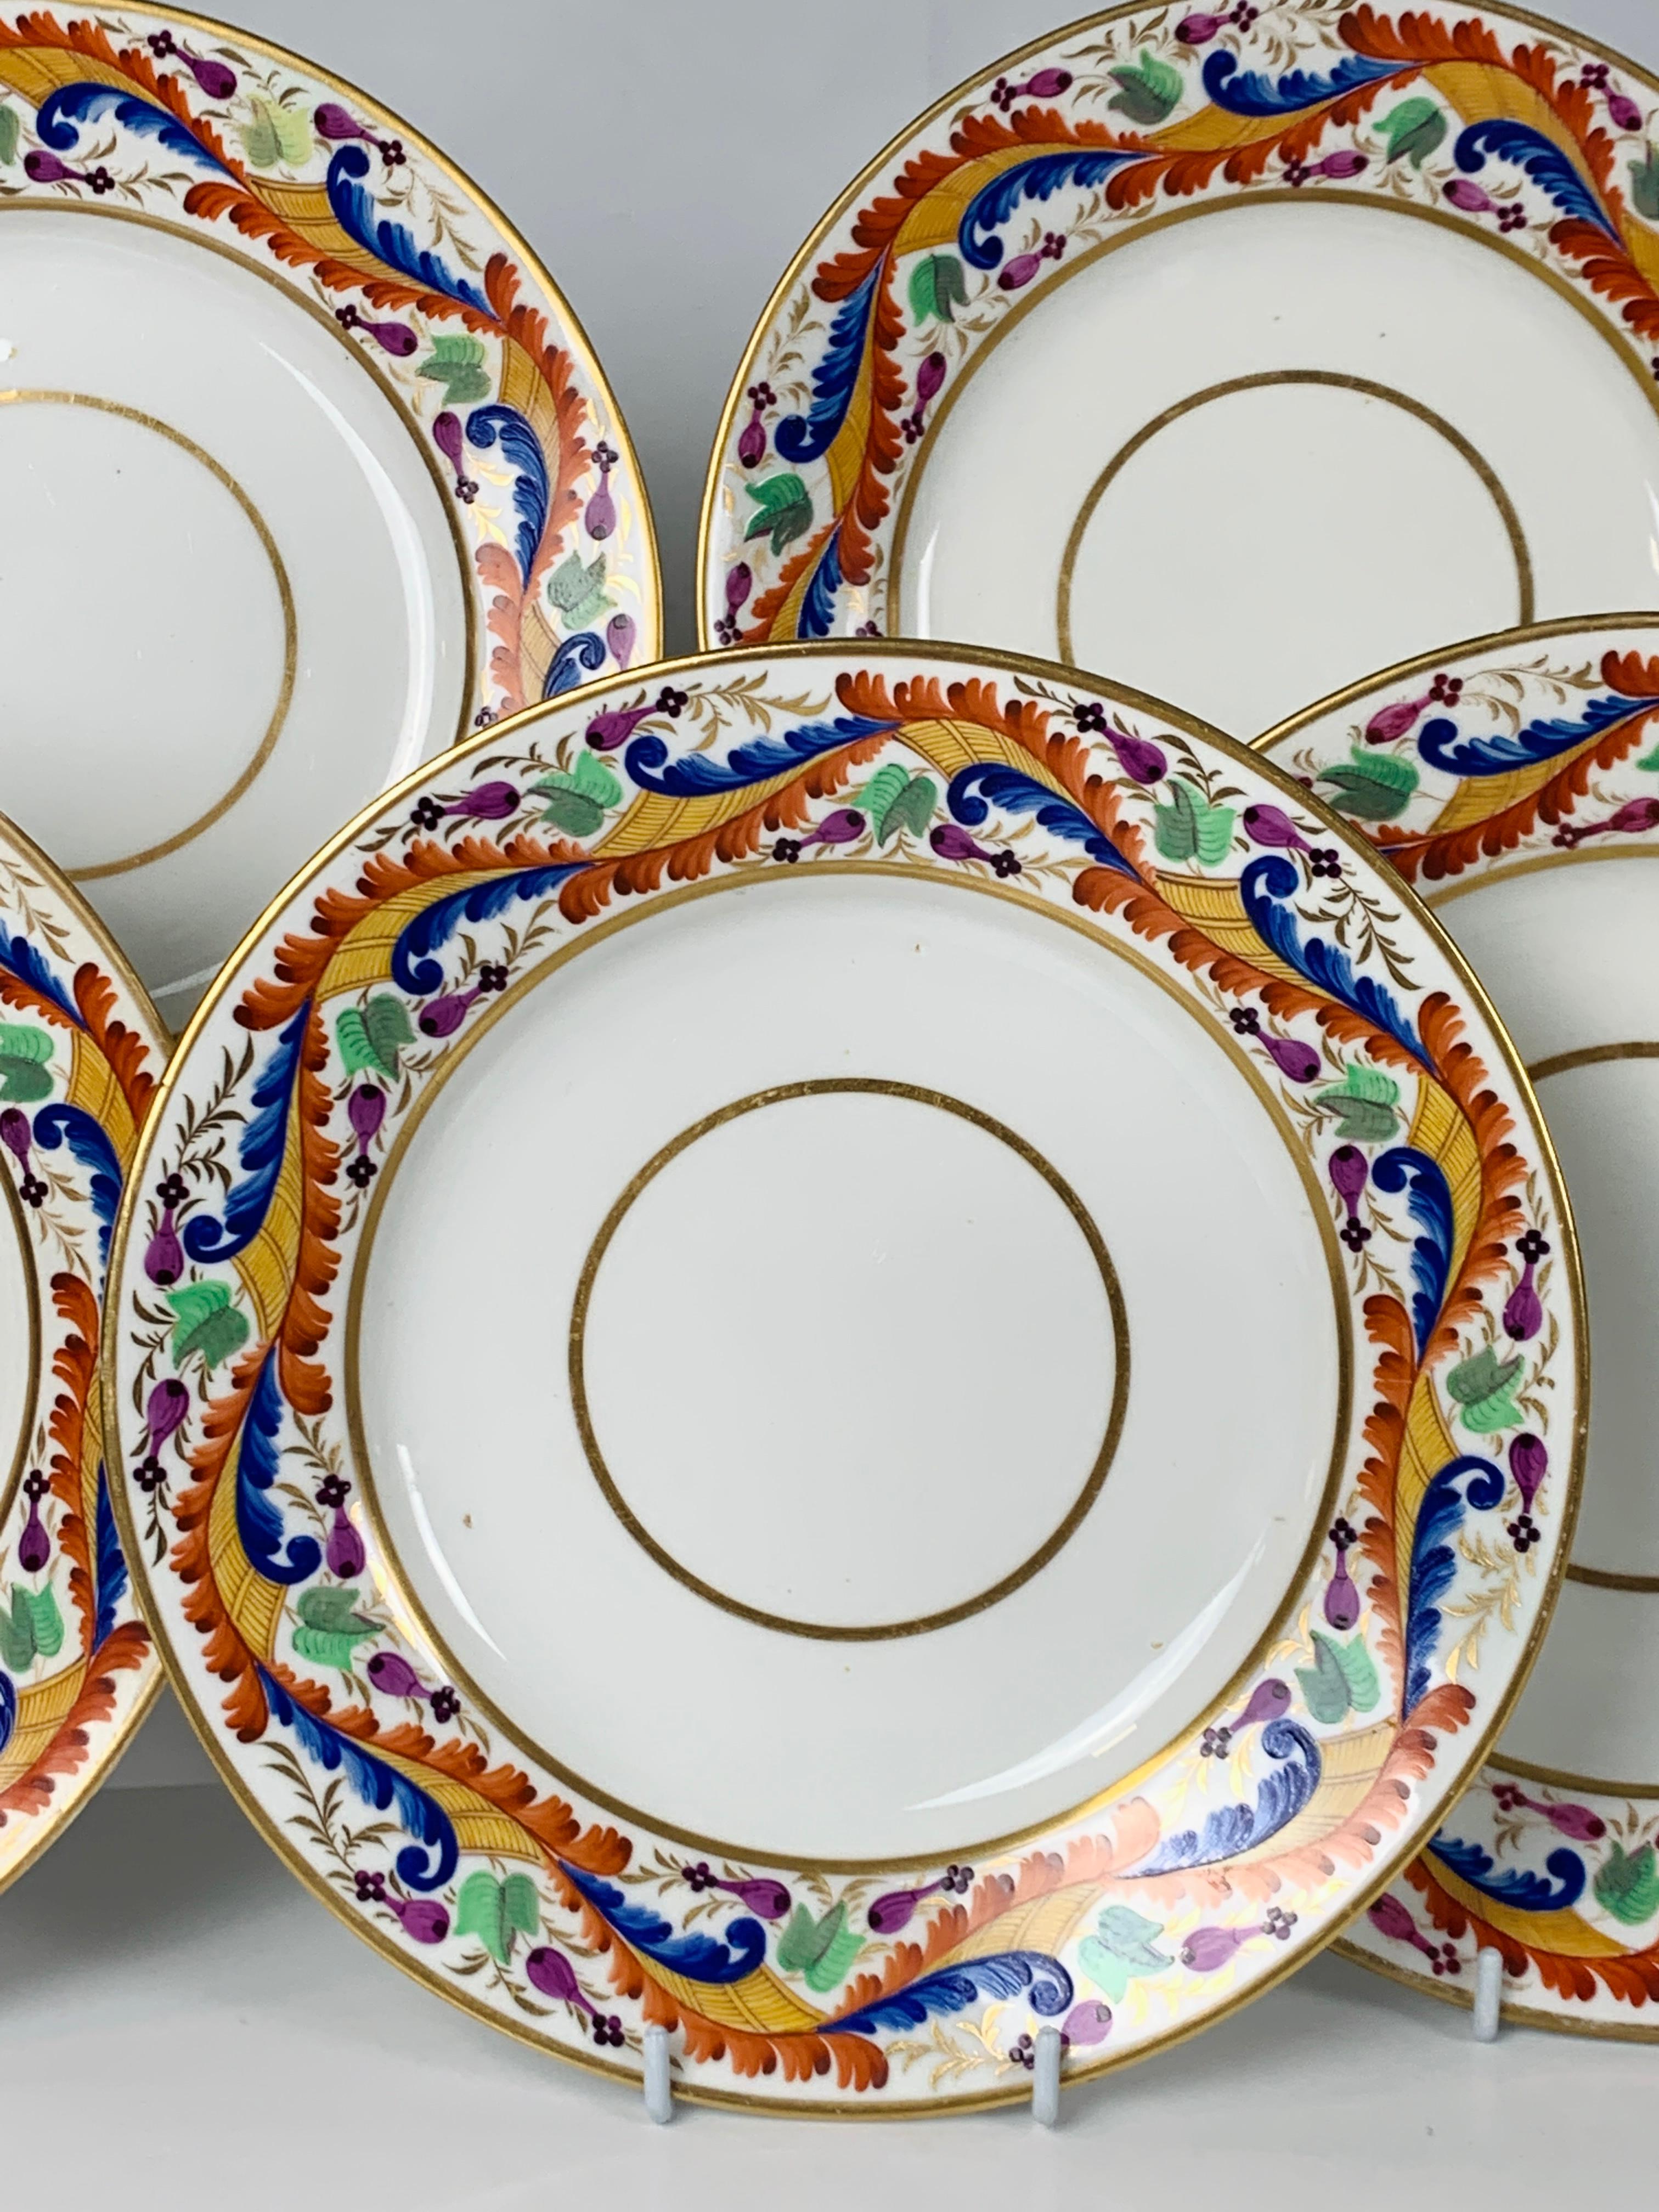 A set of five Derby dishes made in England, circa 1810. The brilliant colors of the border: red, orange, and blue combine in an exquisite vine-like pattern. The green flowers, gilded leaves, and small purple buds add to the colorful design. At the